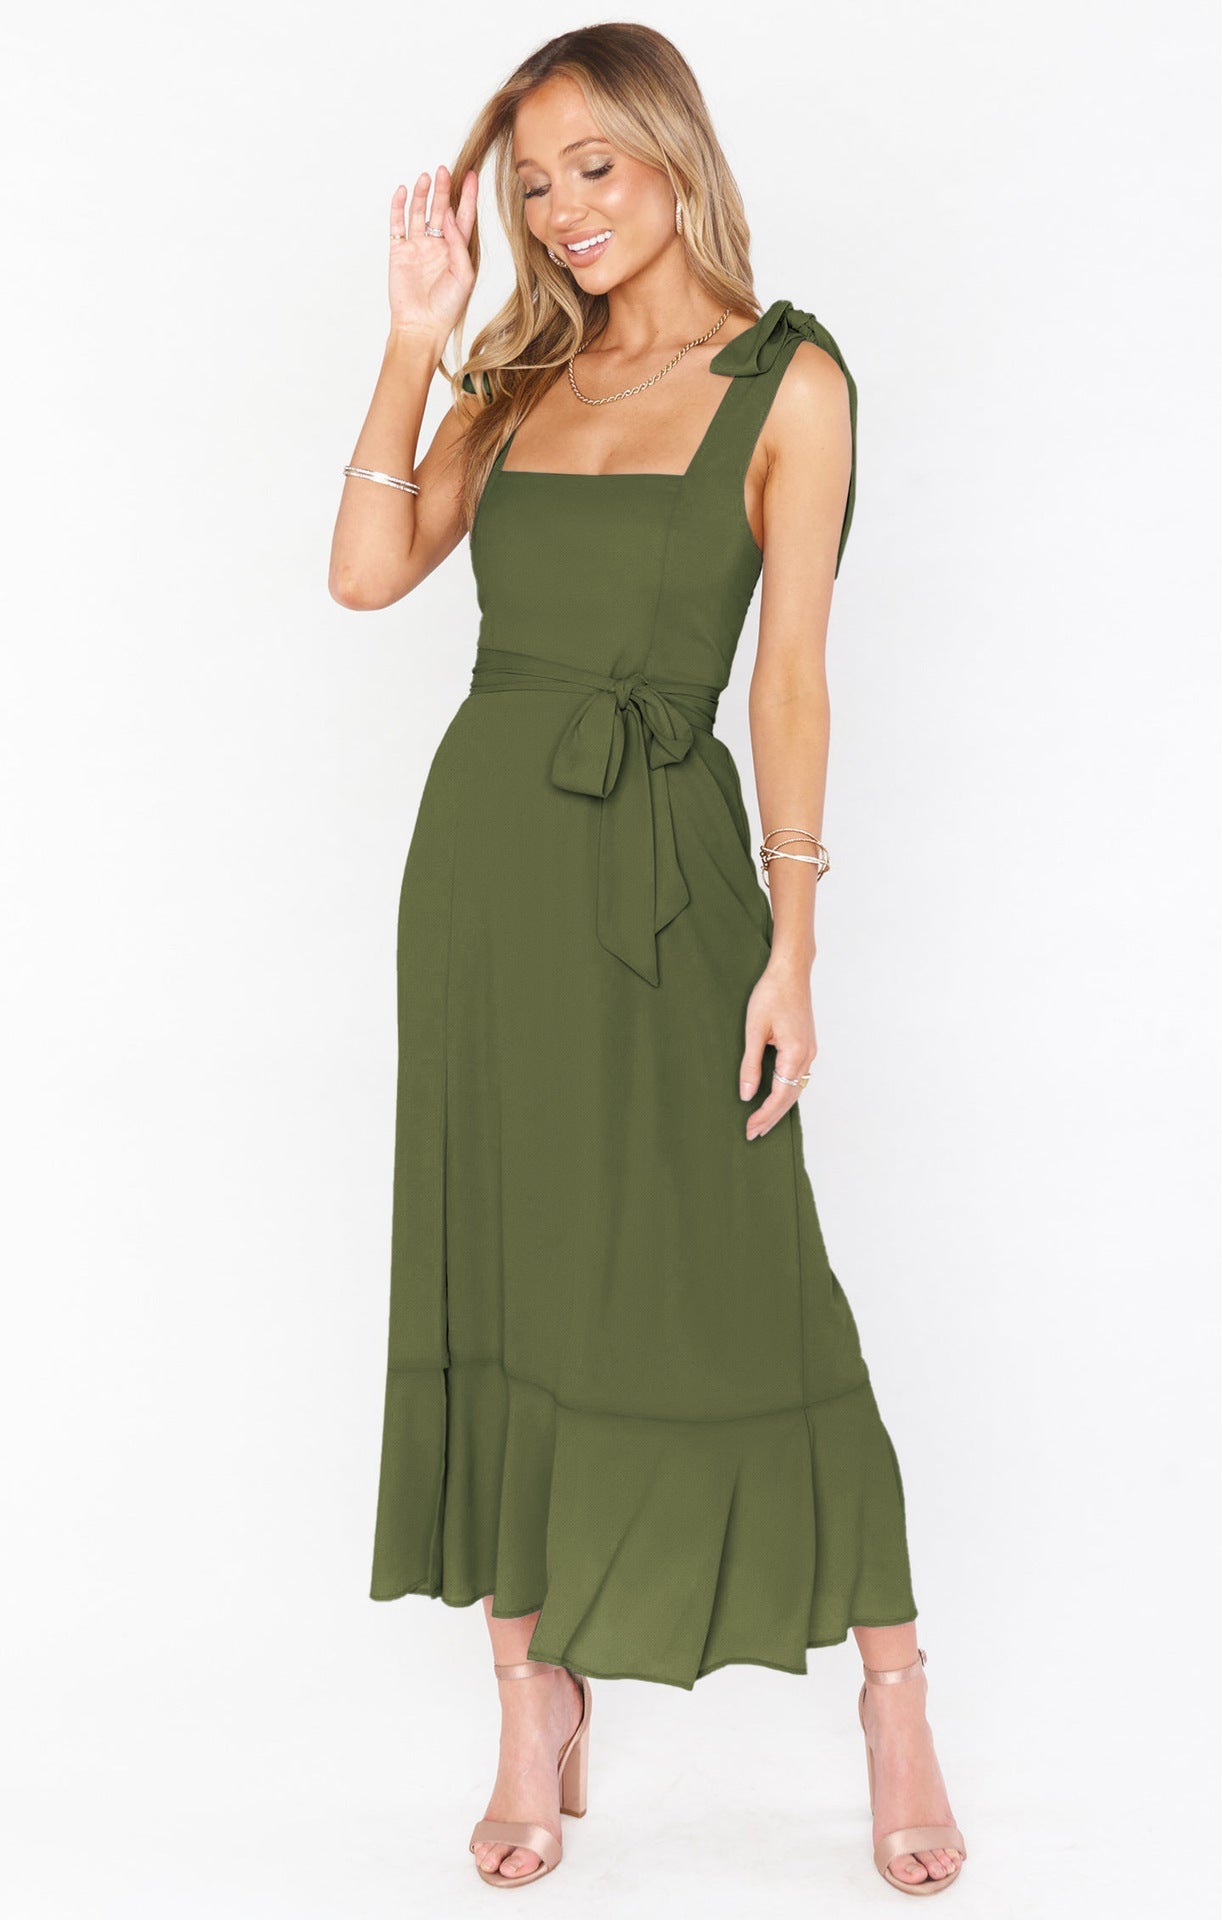 Fashion Summer Split Front Midi Dresses for Women-Dresses-Army Green-S-Free Shipping Leatheretro